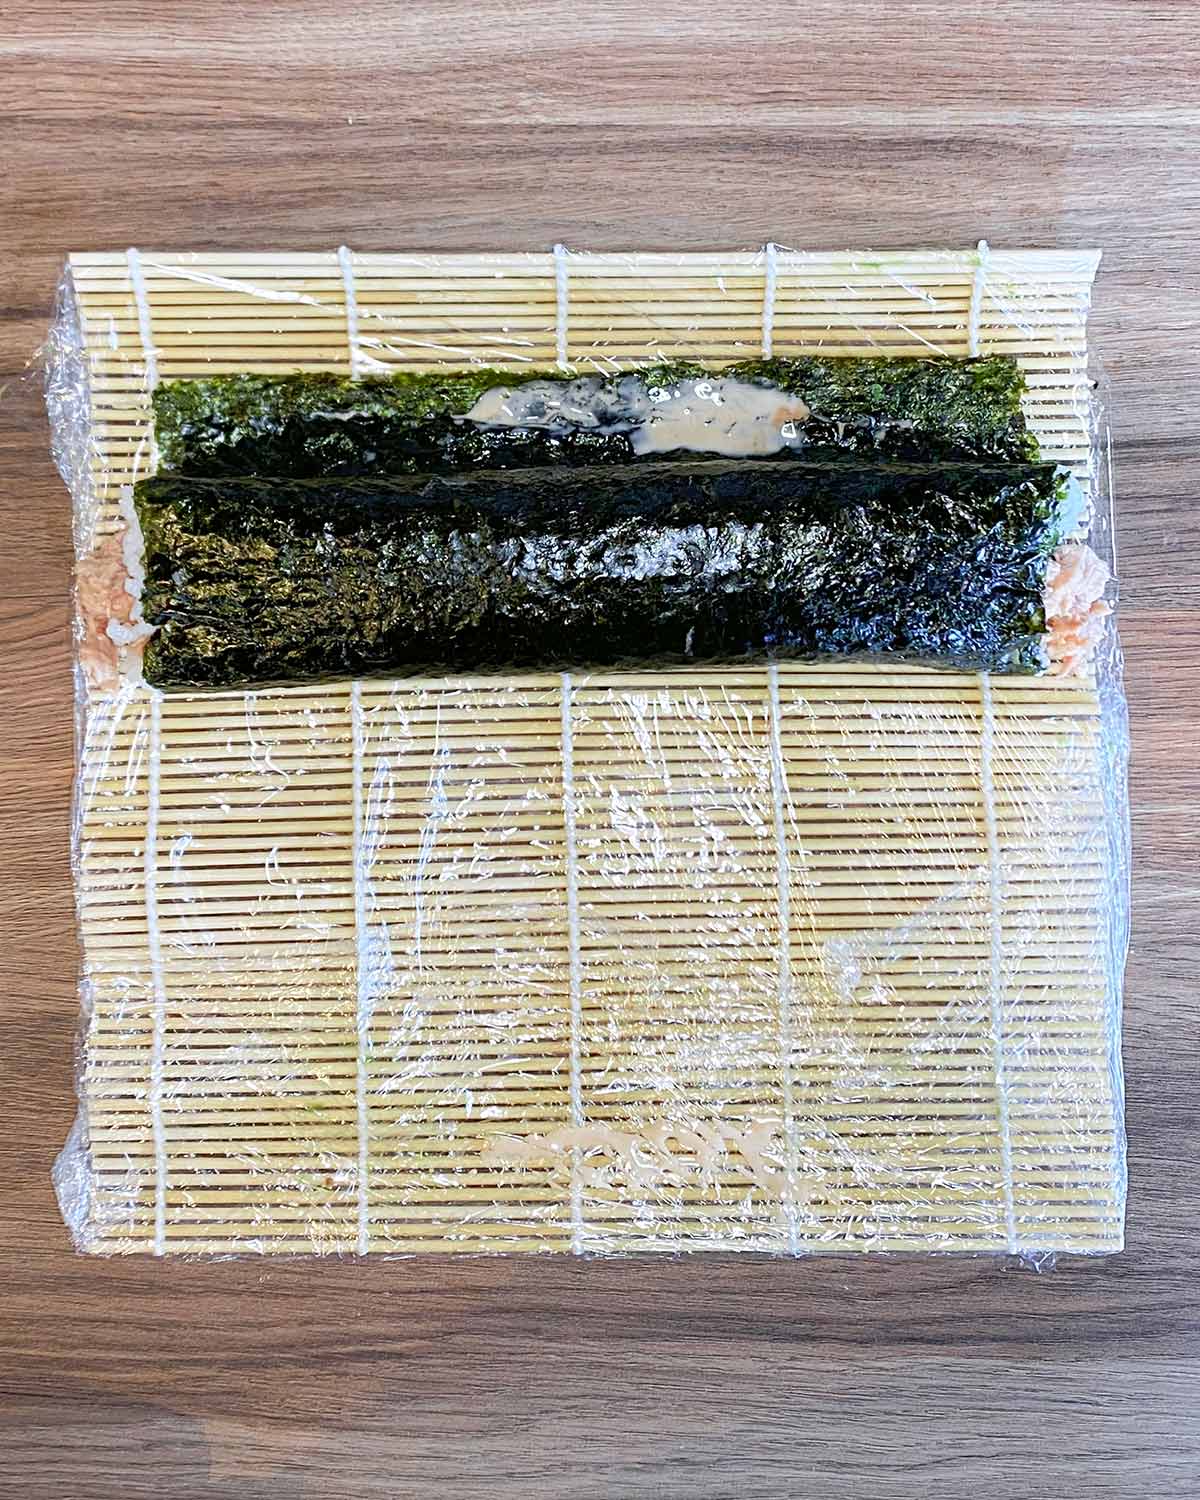 The sushi rolled up into a long roll.